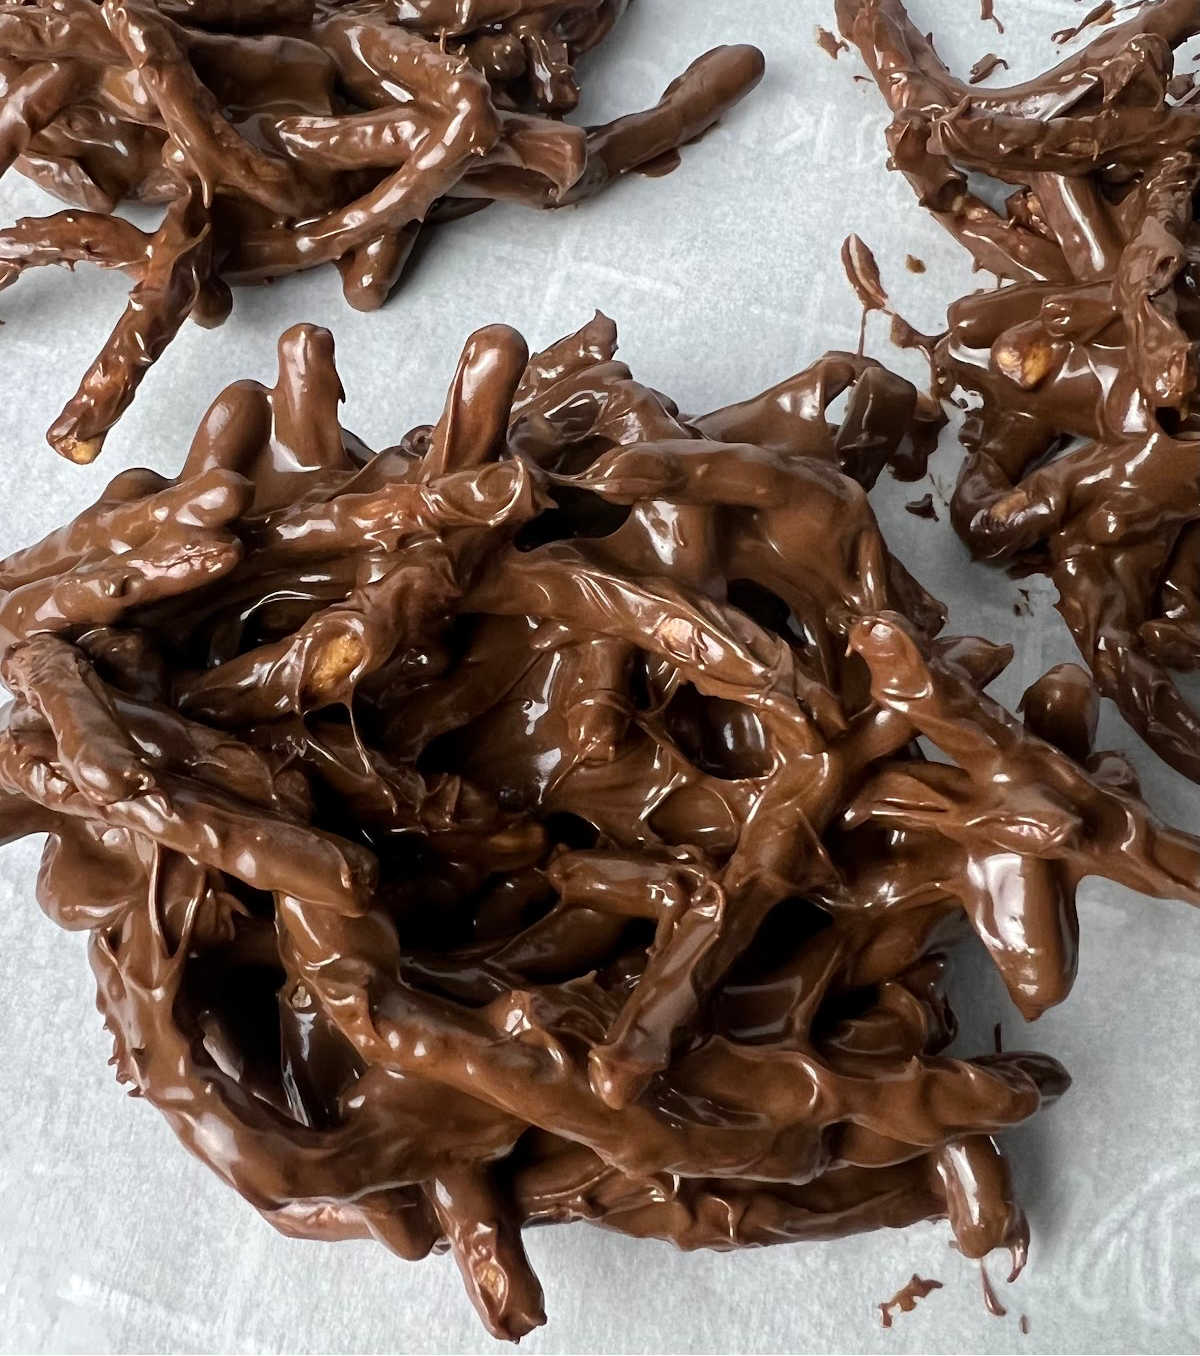 Chocolate covered chowmain noodles in piles on a baking sheet
